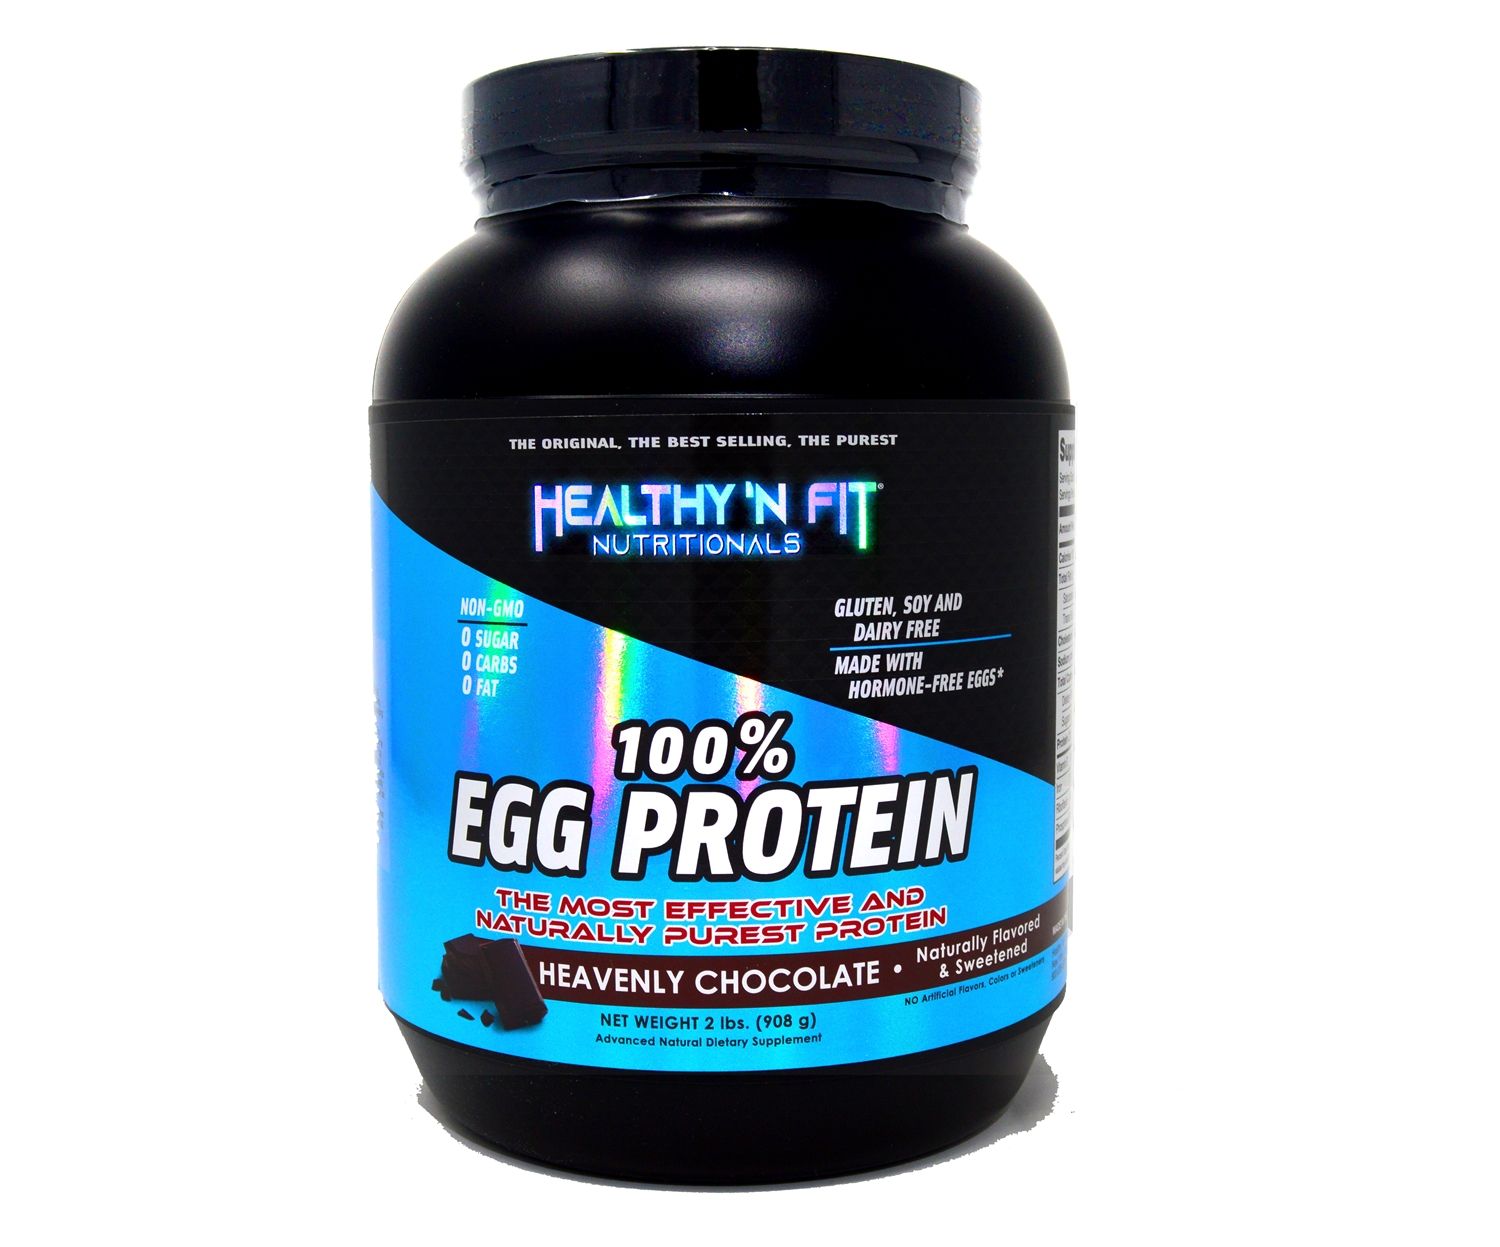 Healthy N Fit 100% Egg Protein, Size: 2 lb, Flavor: Heavenly Chocolate